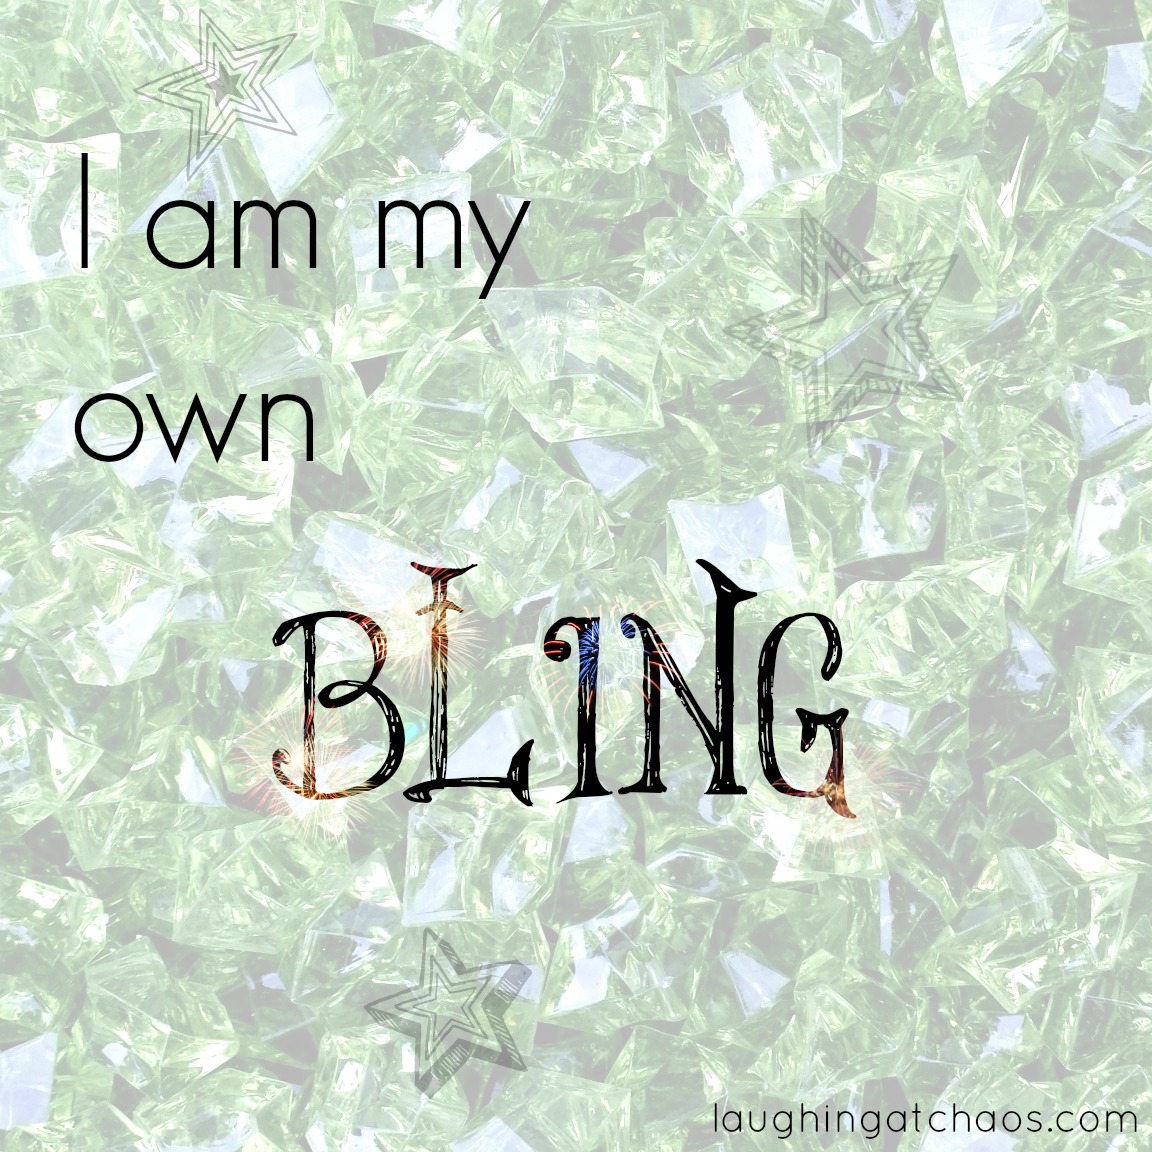 I am my own bling